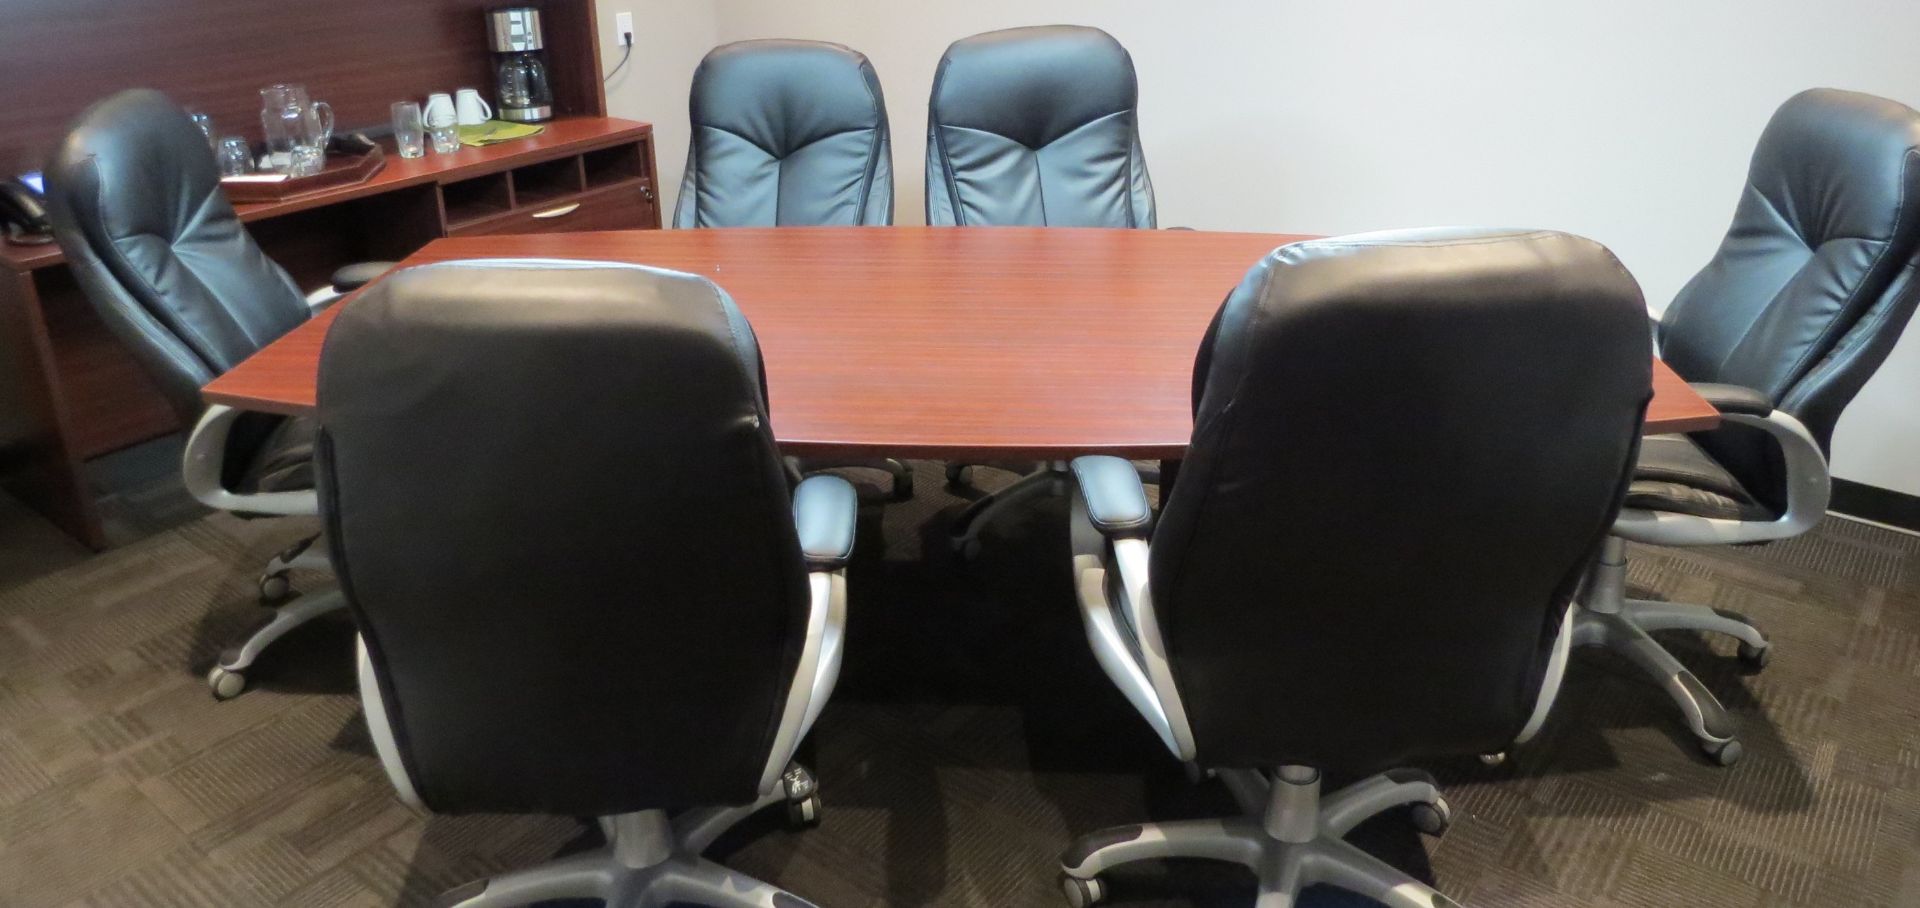 Conference table with 6 chairs